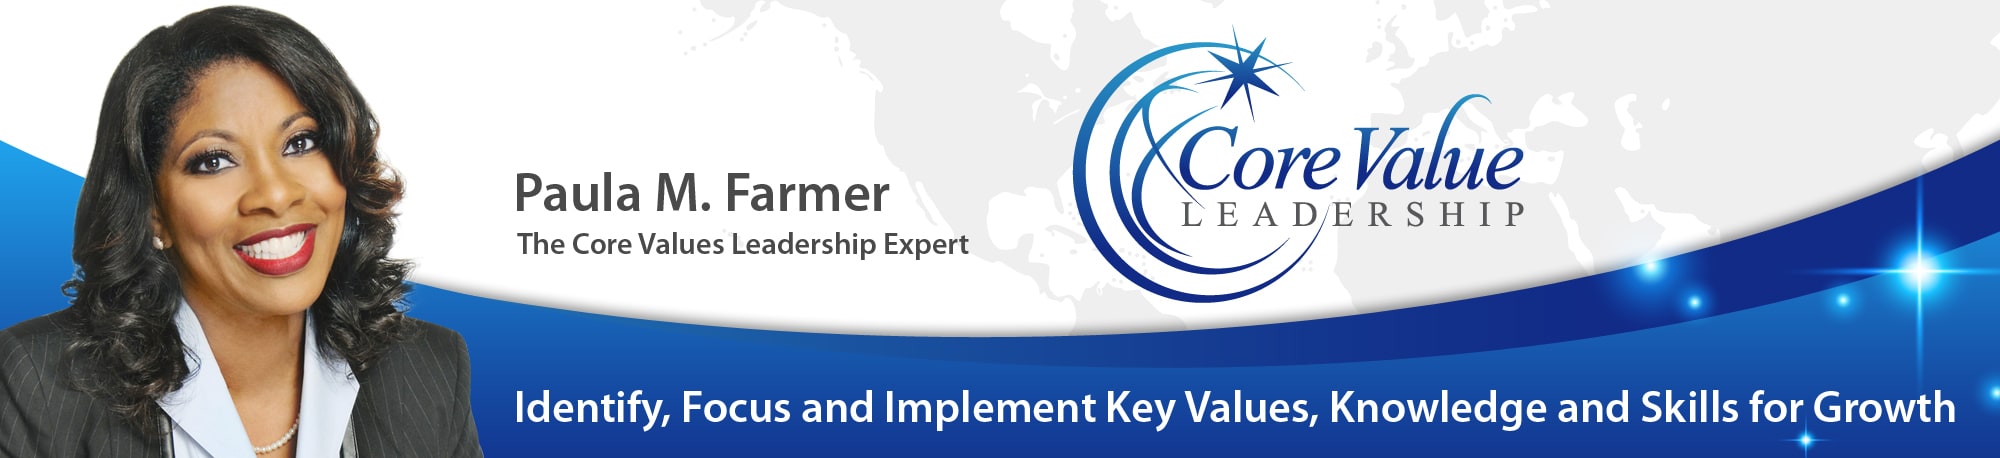 banner for Core Value Leadership